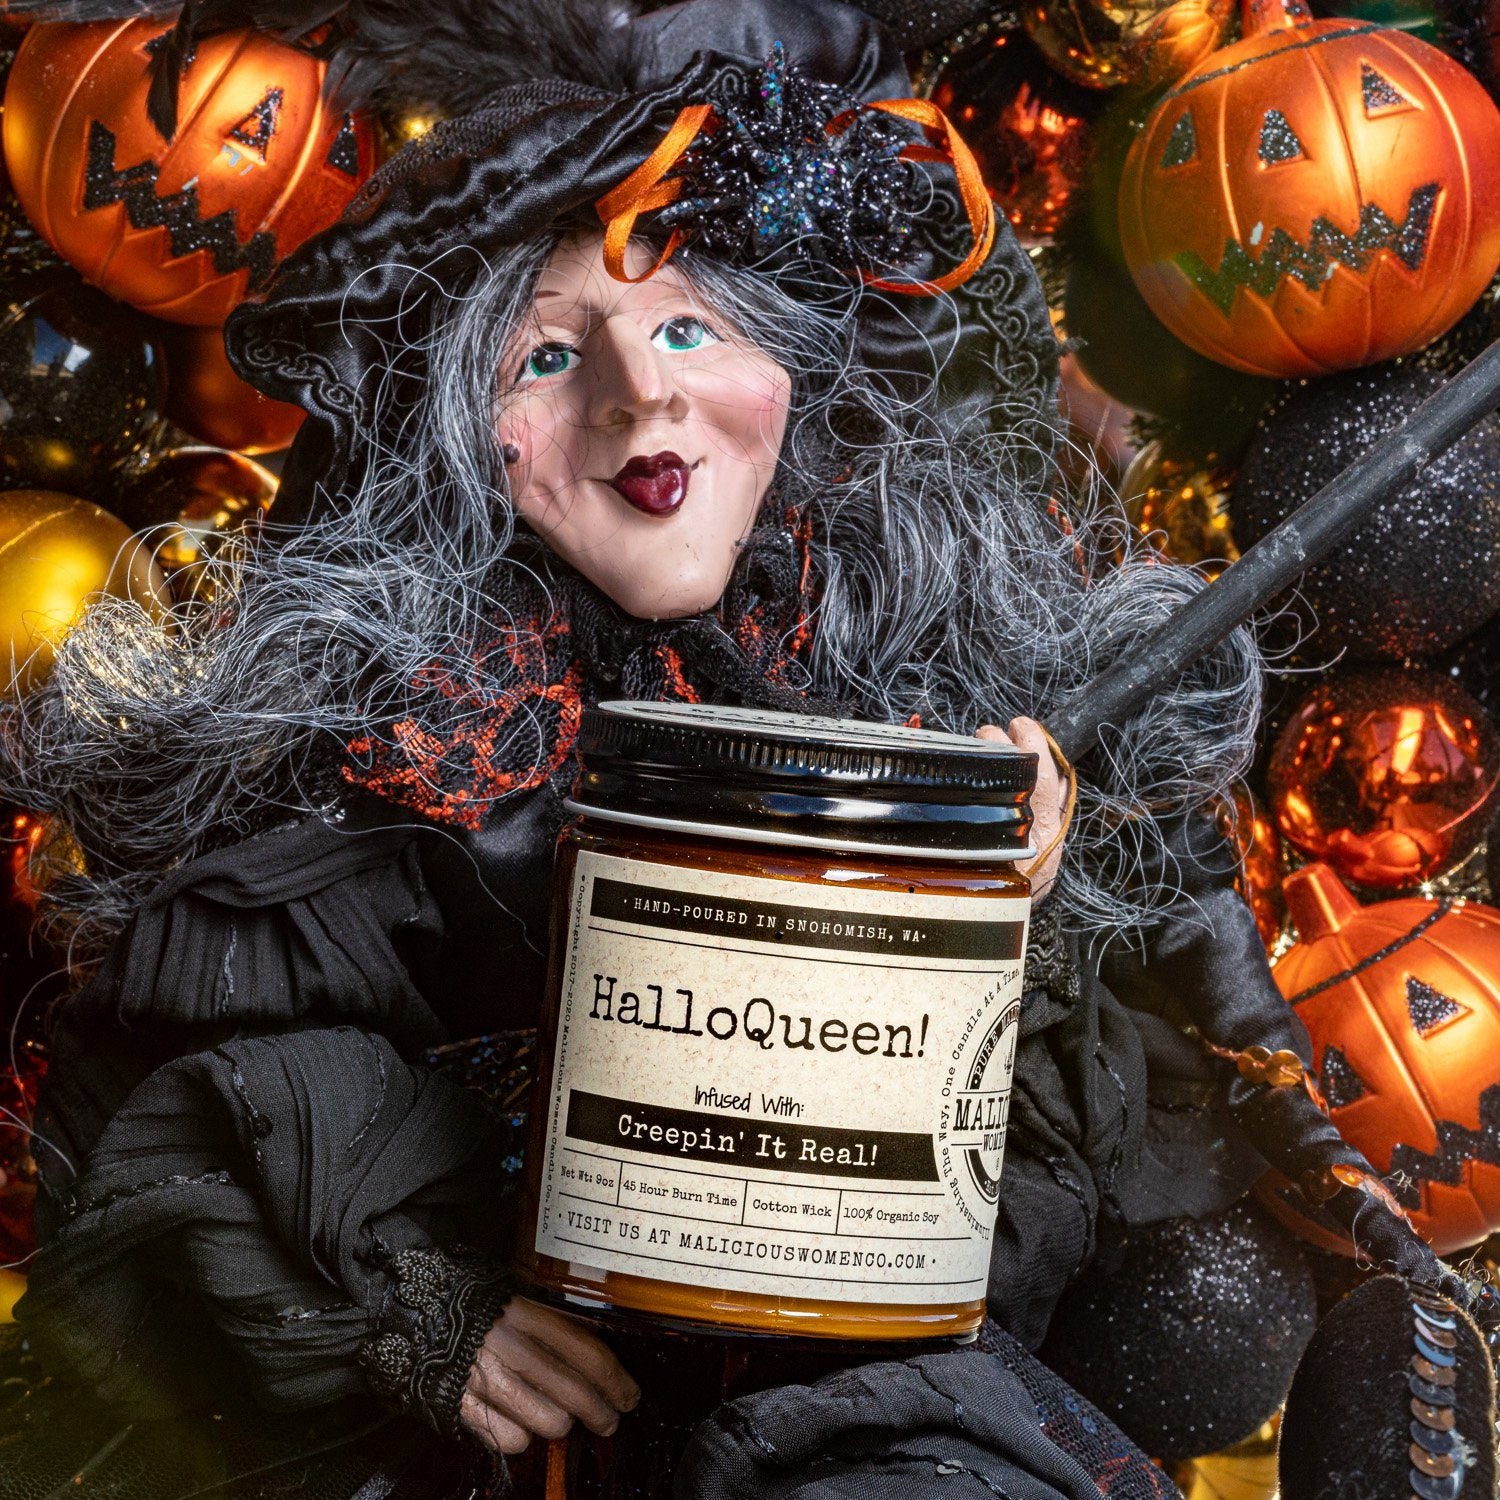 HalloQueen! Infused With "Creepin' It Real!" Scent: Pumpkin, Apple, & Ginger Candle 2021 Malicious Women Co. 